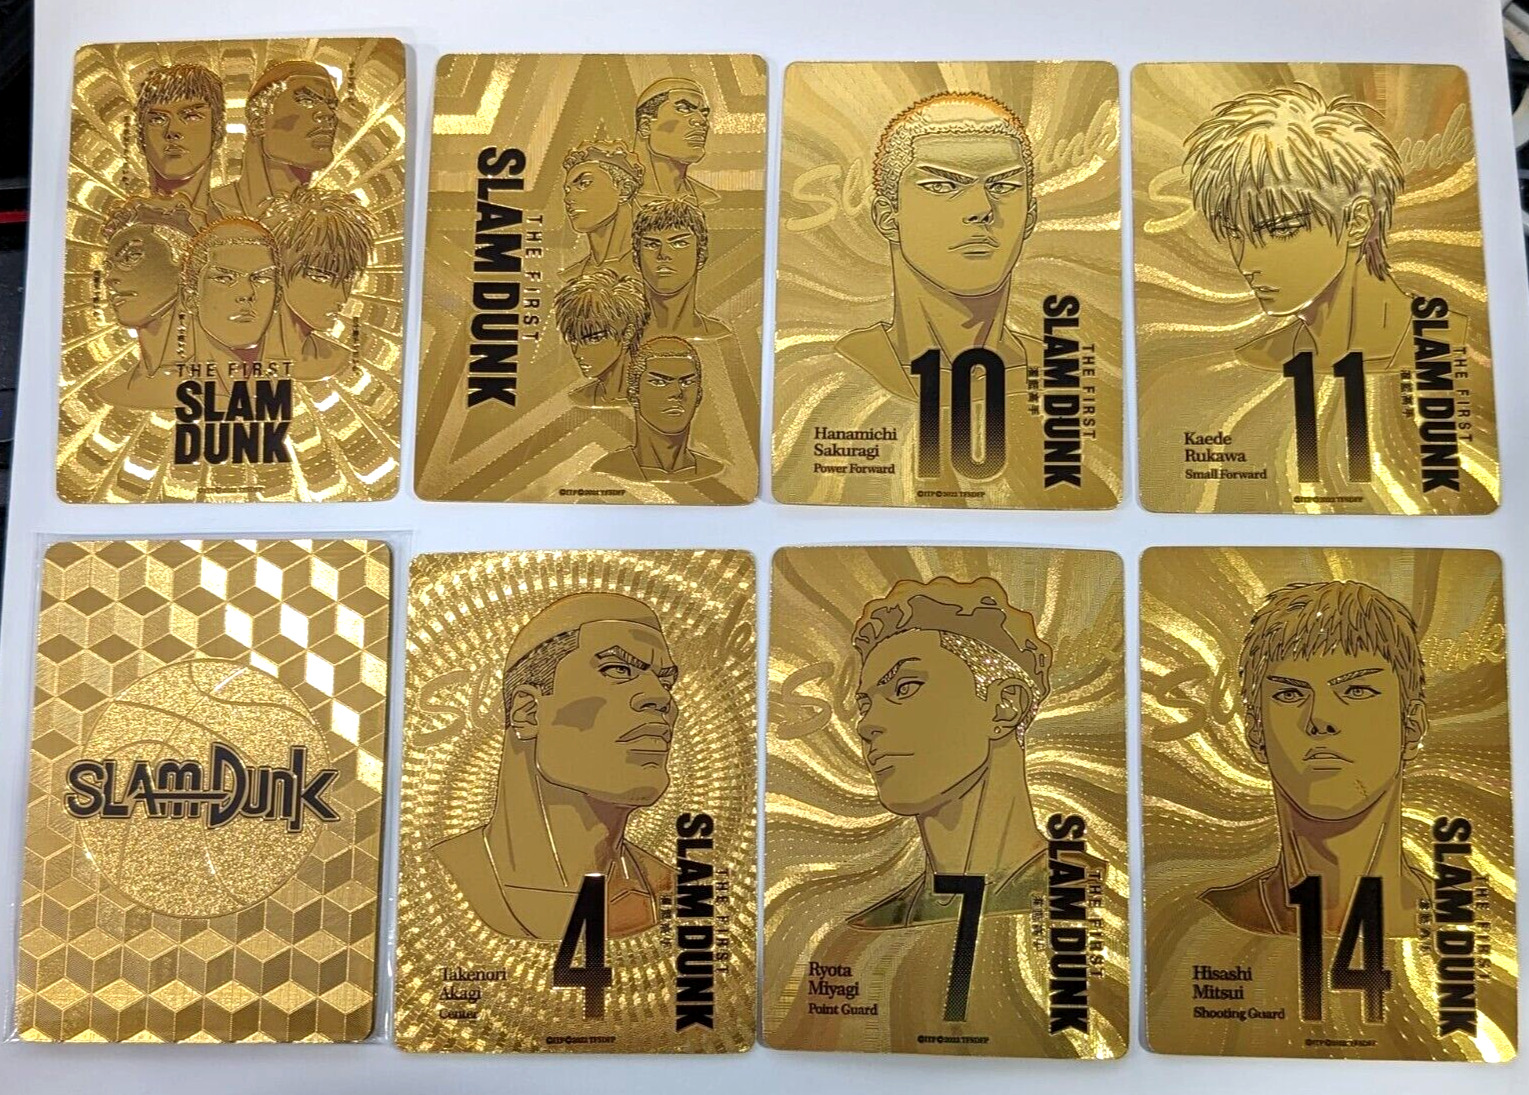 The First Slam Dunk Movie Anime set of 7 Shiny Gold Foil Visual Collectable Card